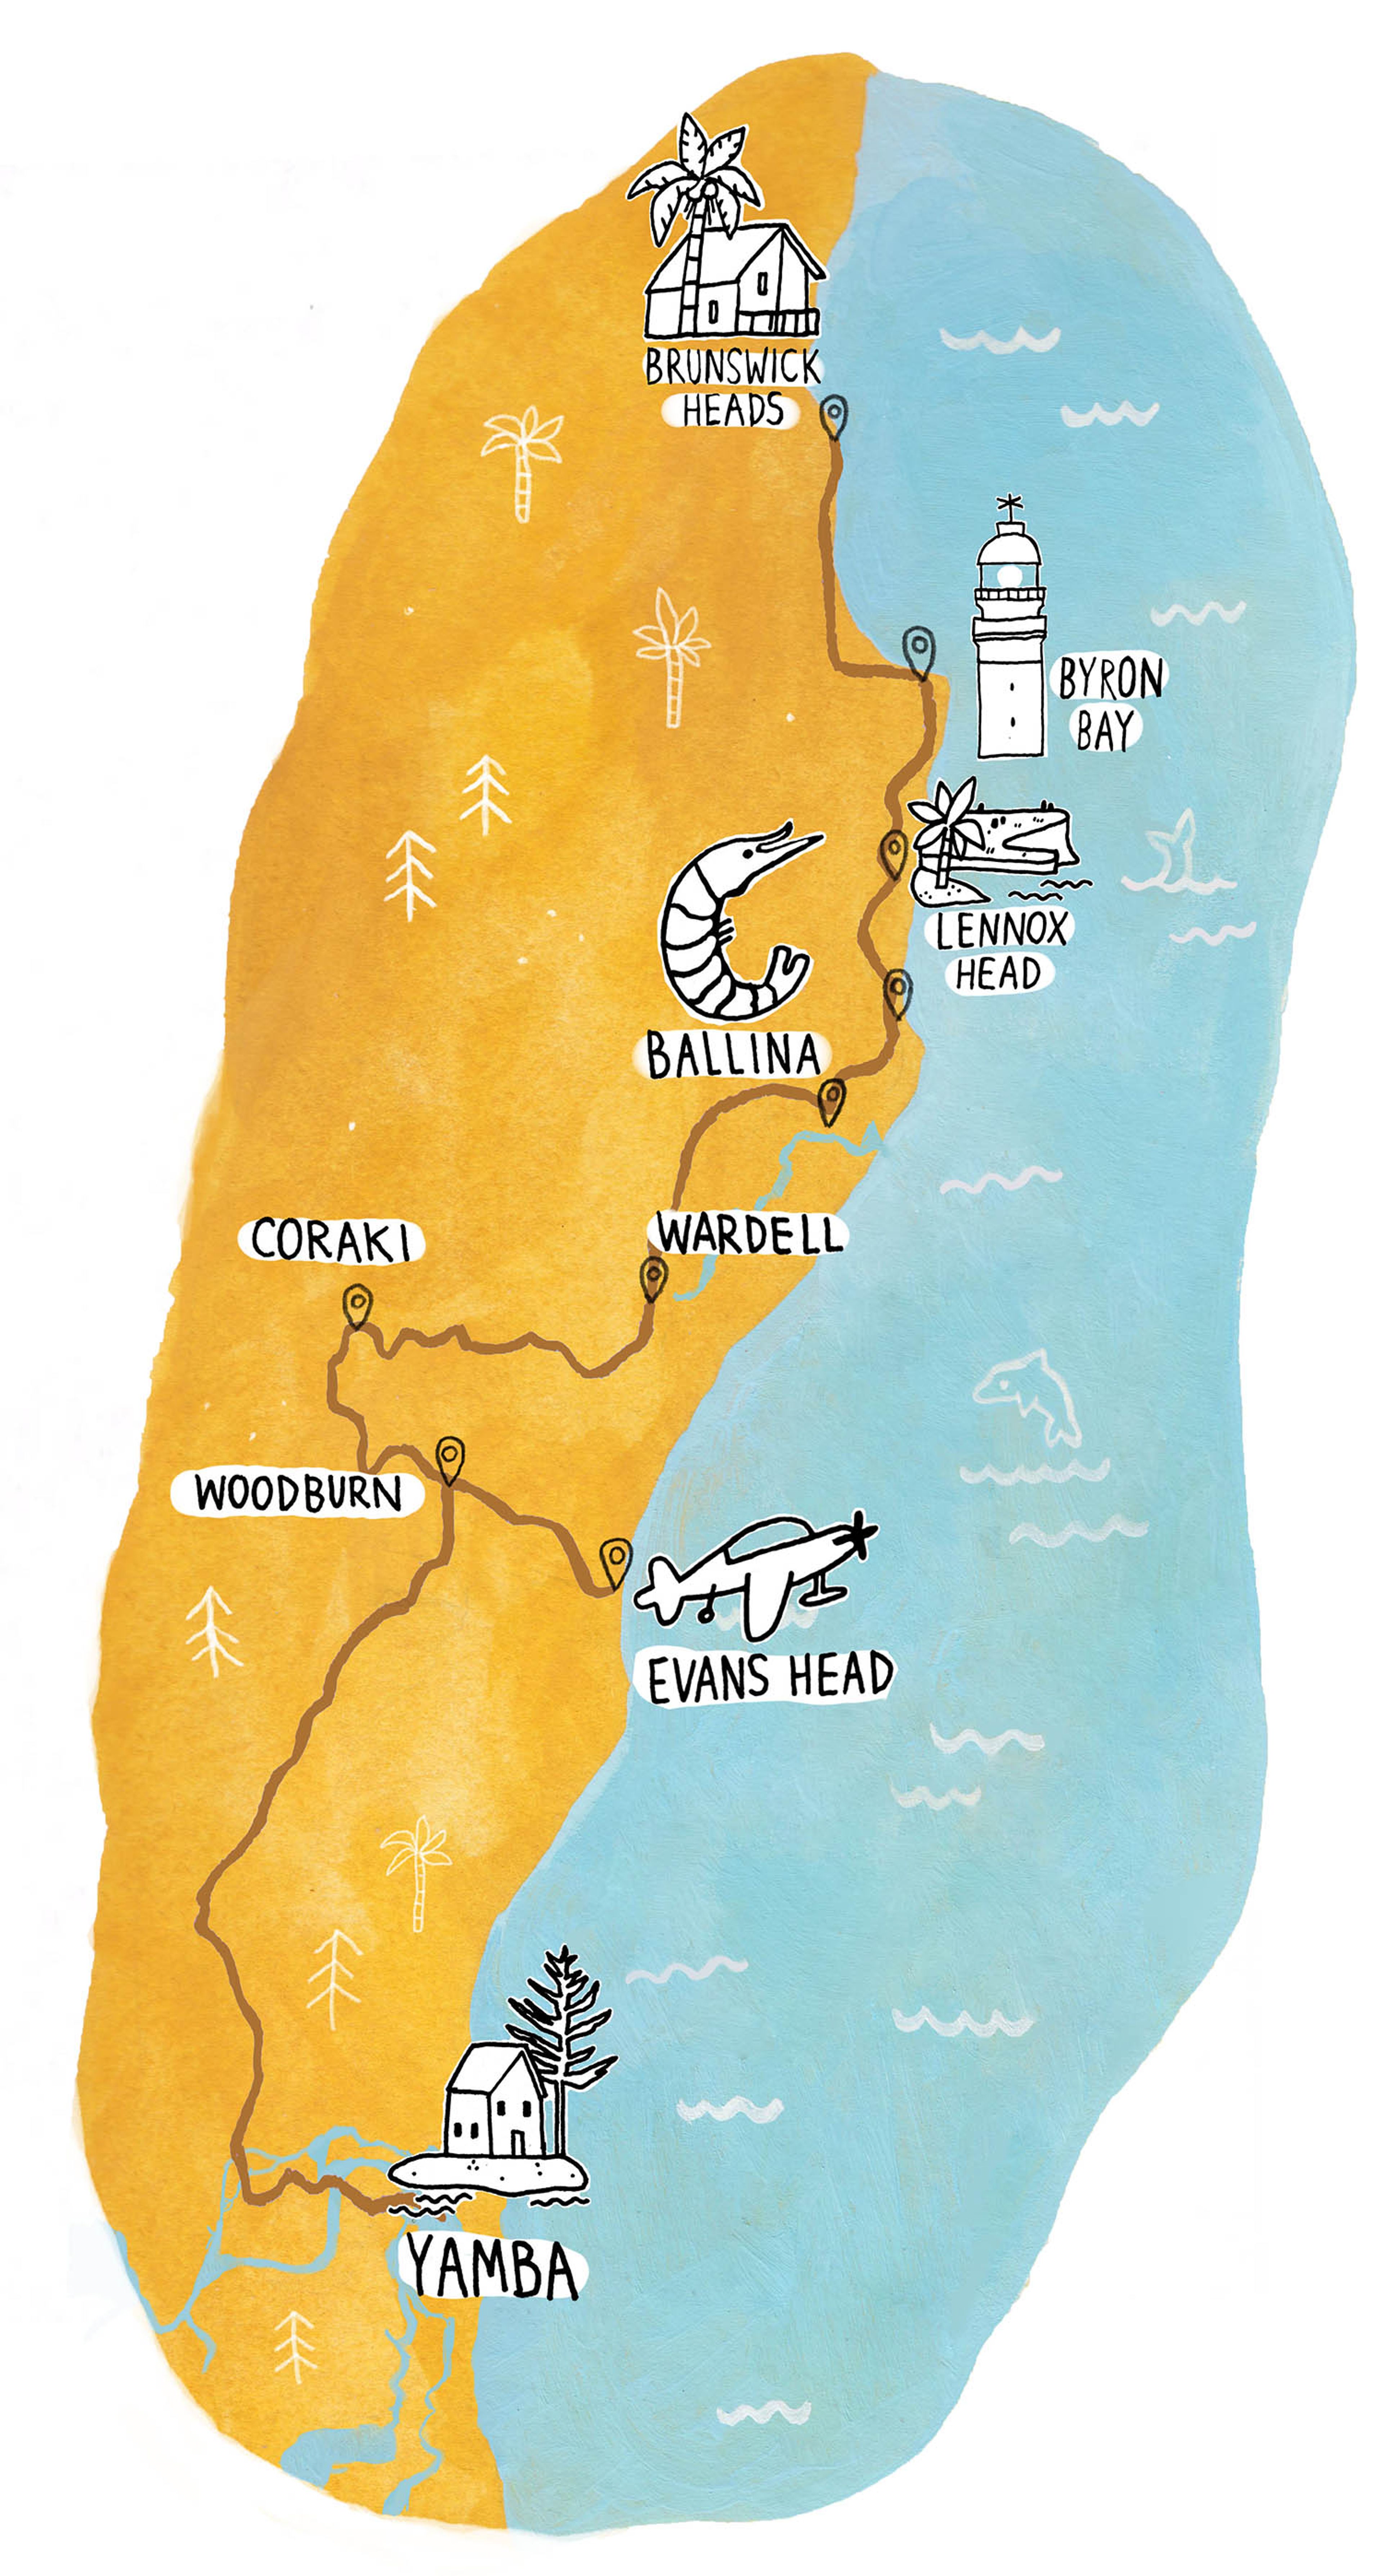 Sydney to Byron Bay: A relaxed NSW road trip itinerary - A Globe